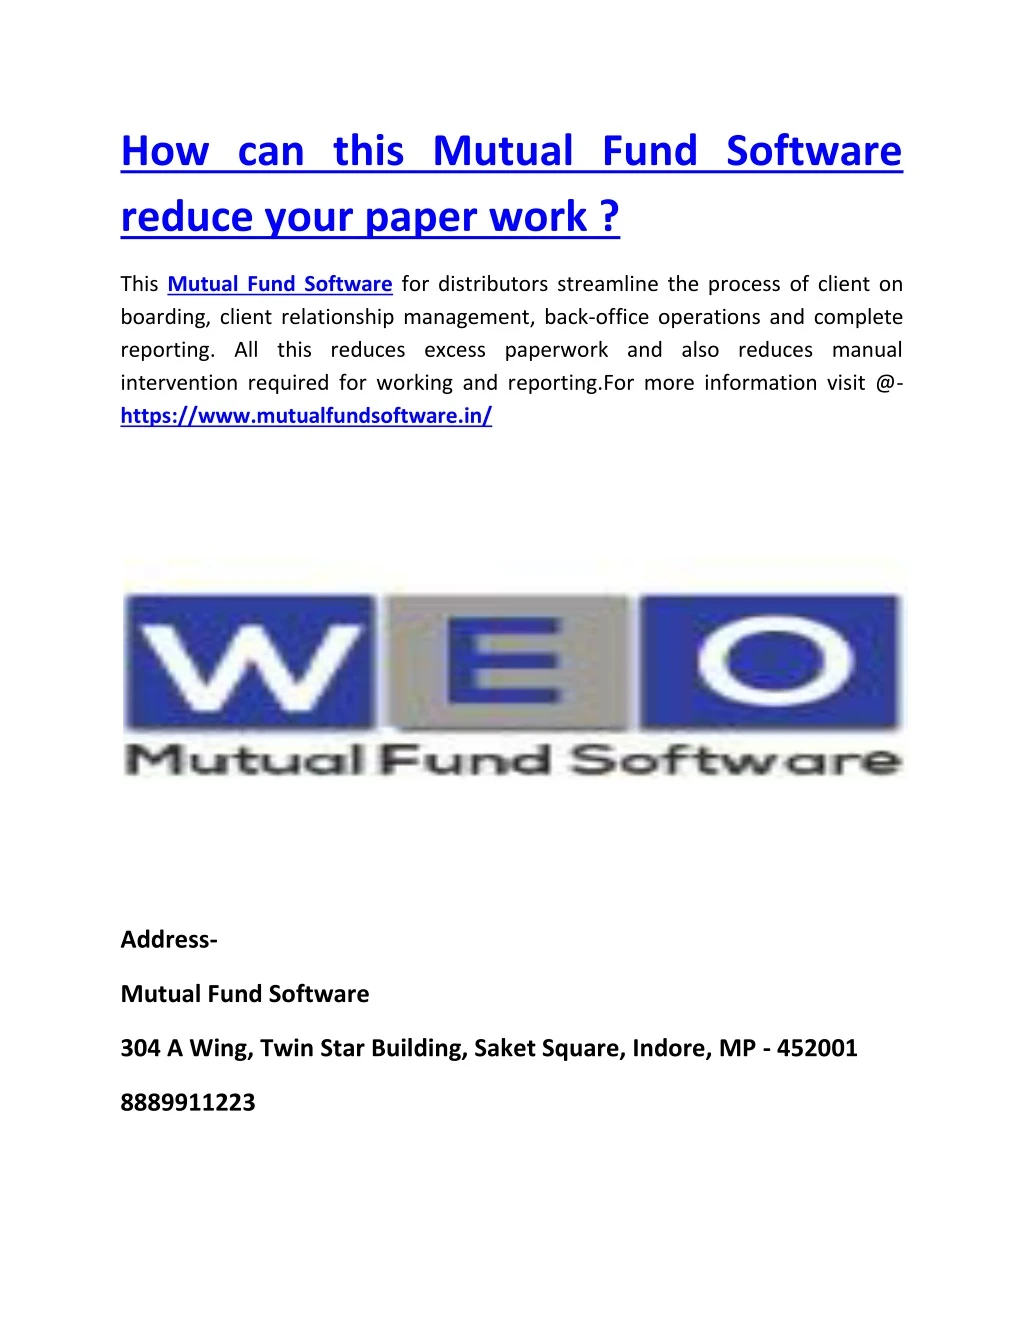 how can this mutual fund software reduce your